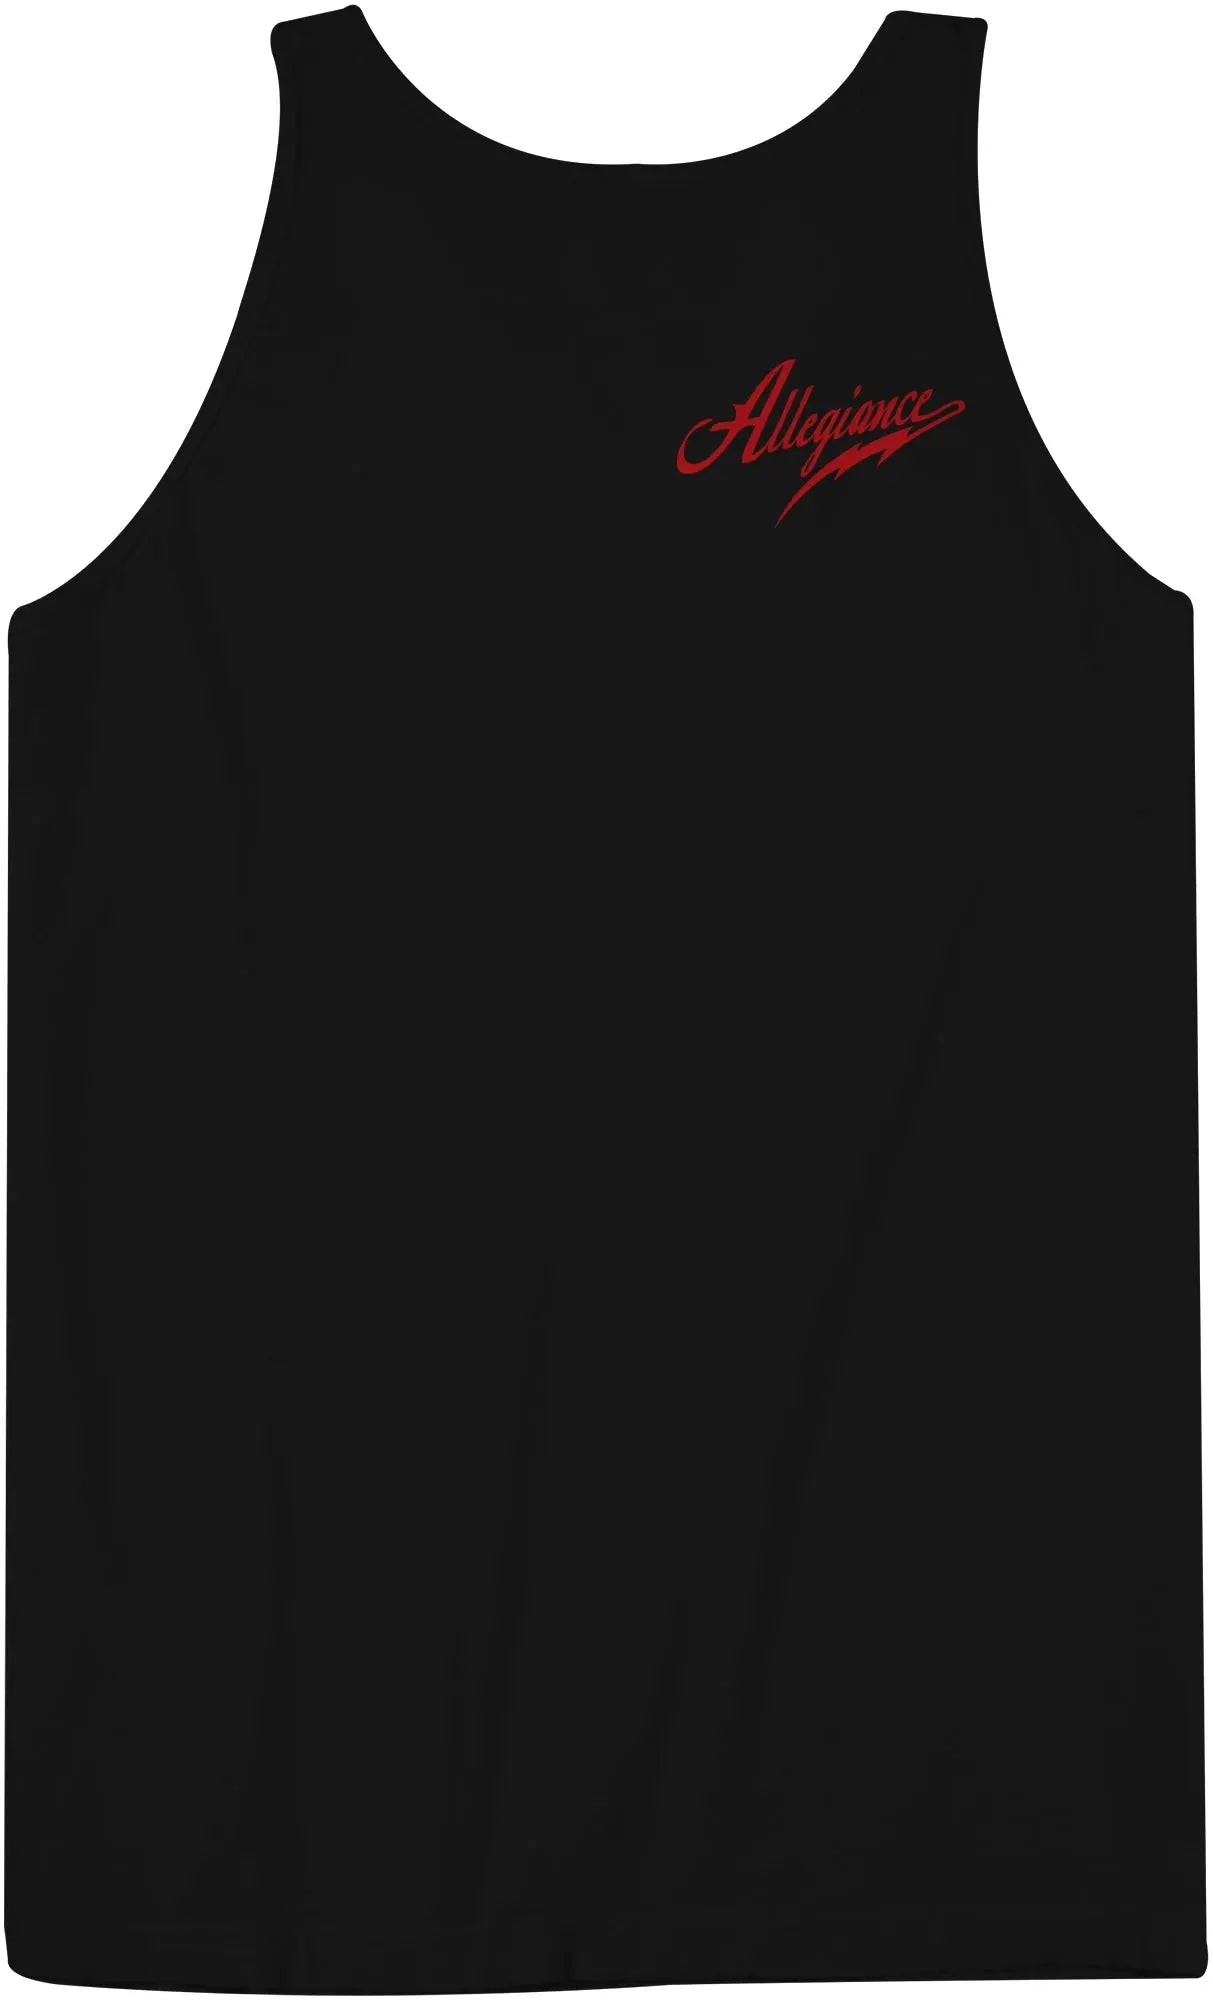 Red Line Tank Top ALLEGIANCE CLOTHING